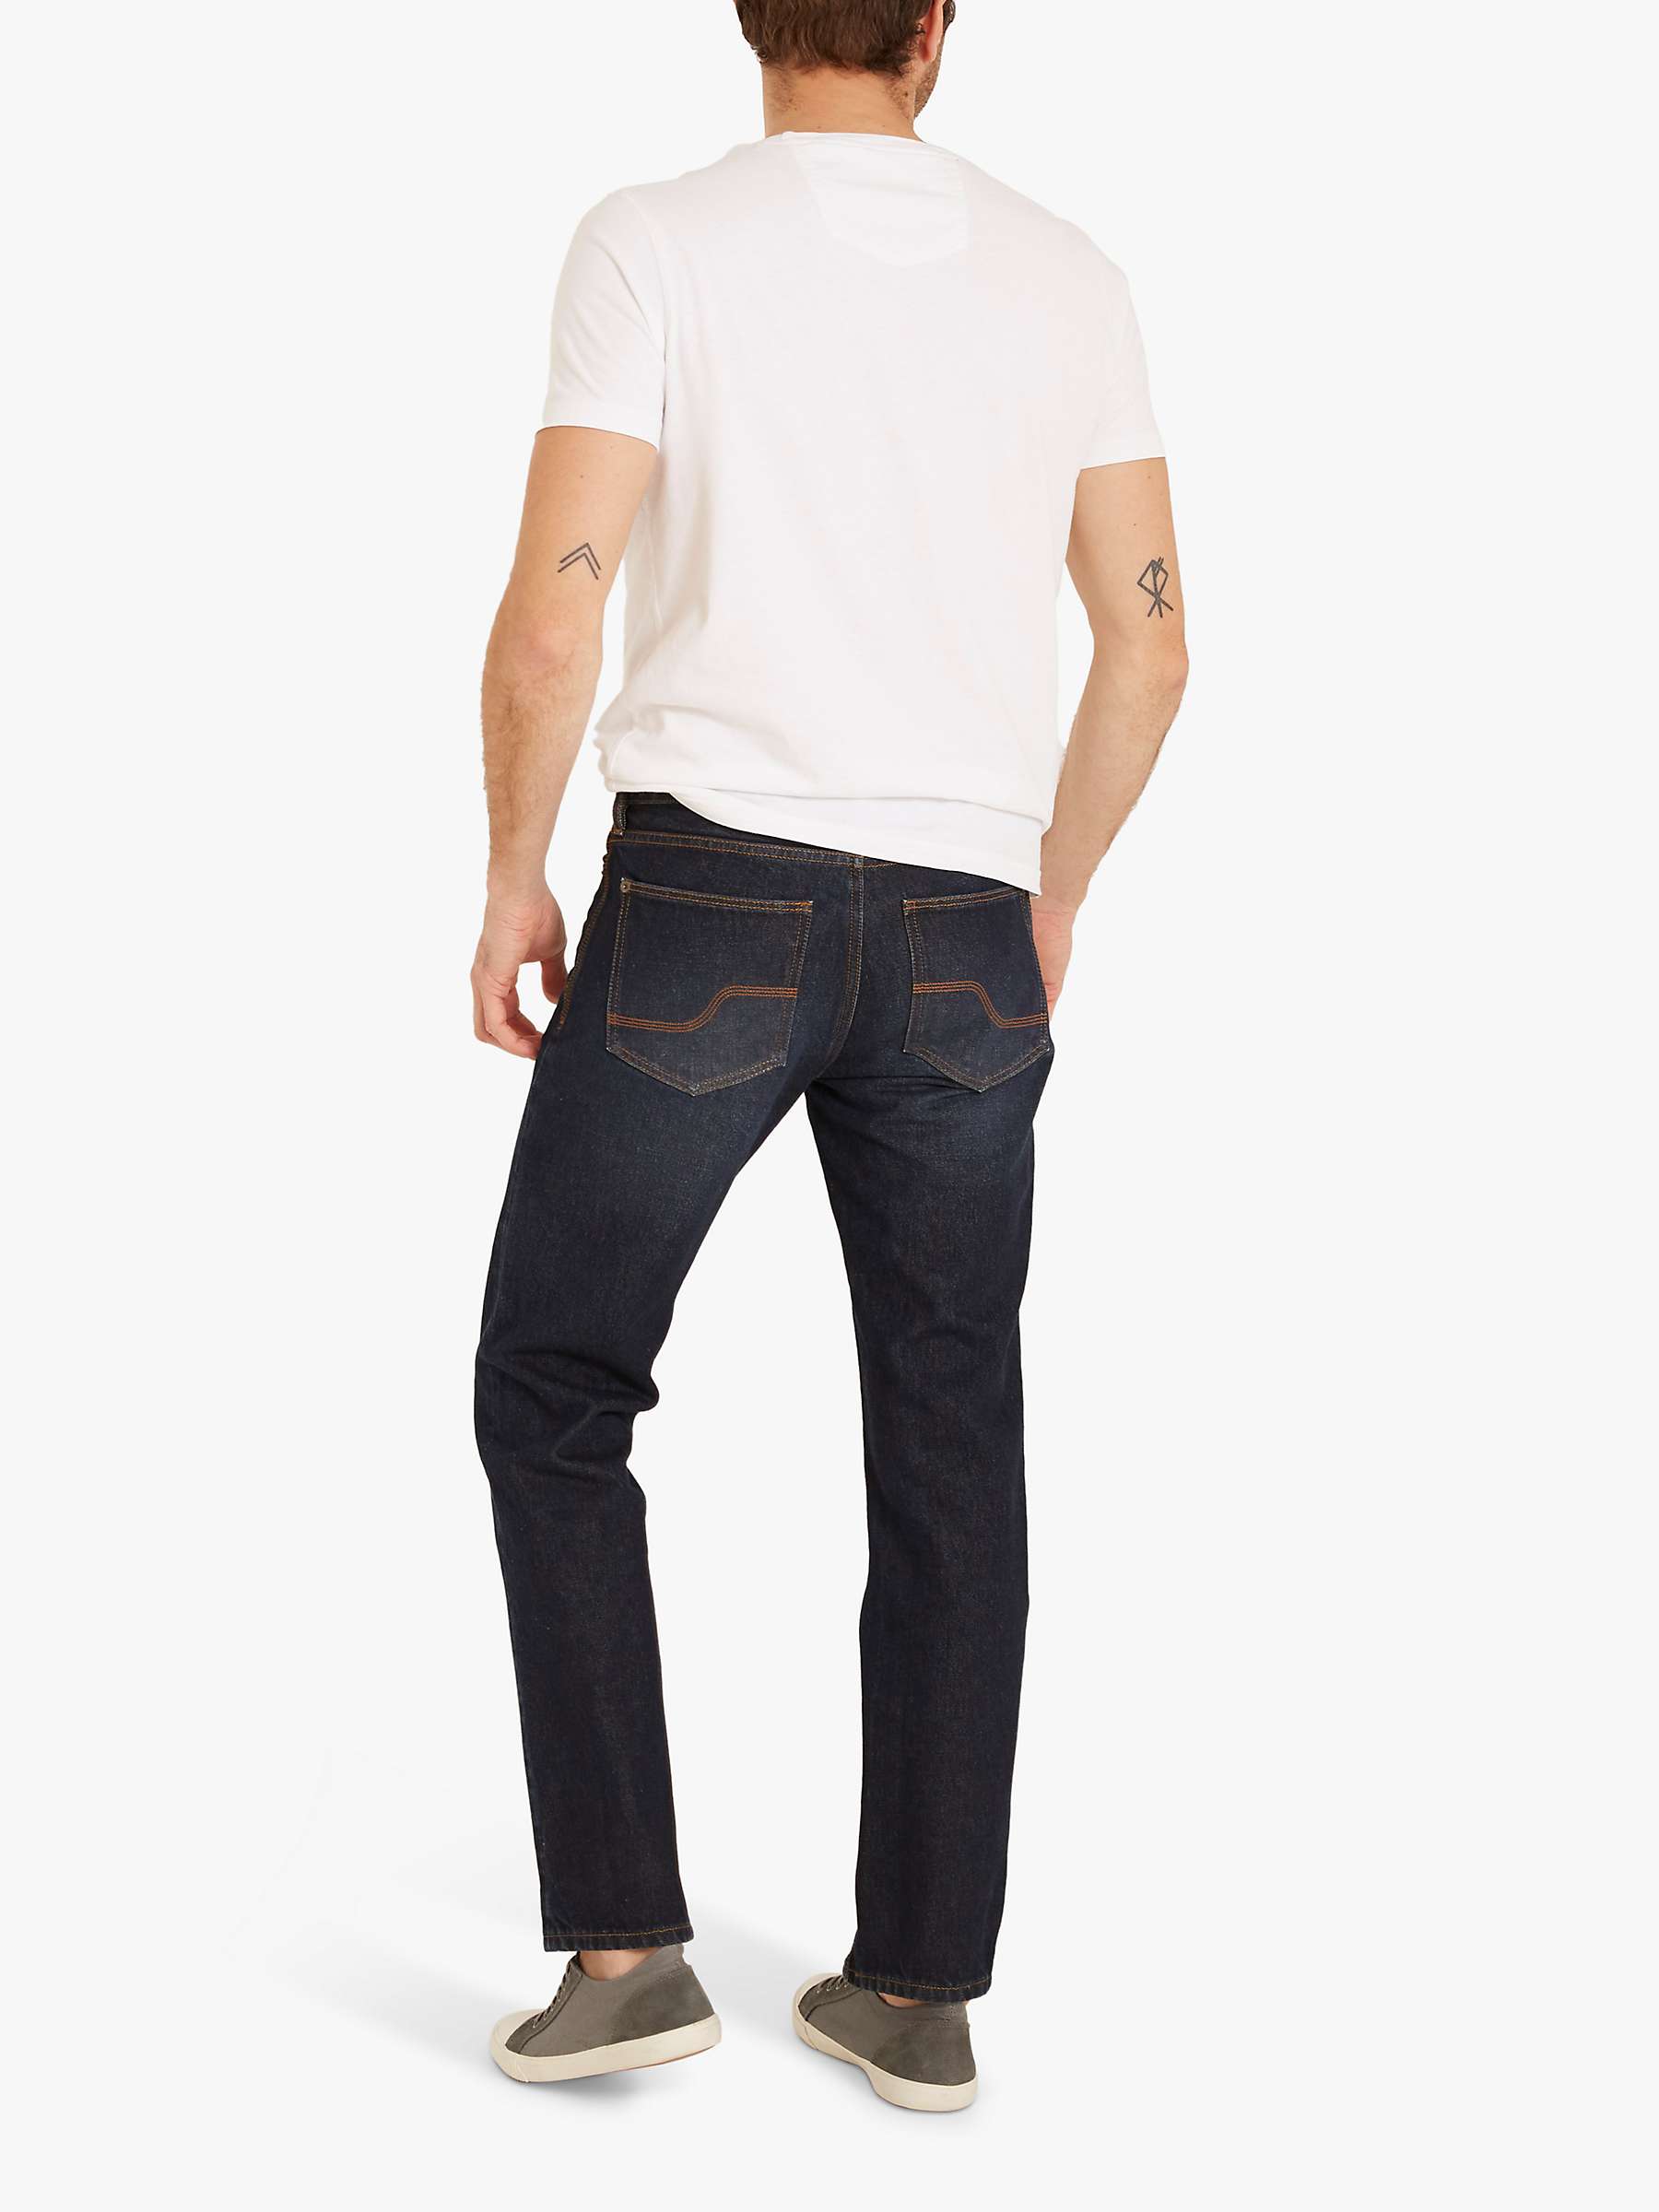 Buy FatFace Straight Fit Jeans, Denim Online at johnlewis.com